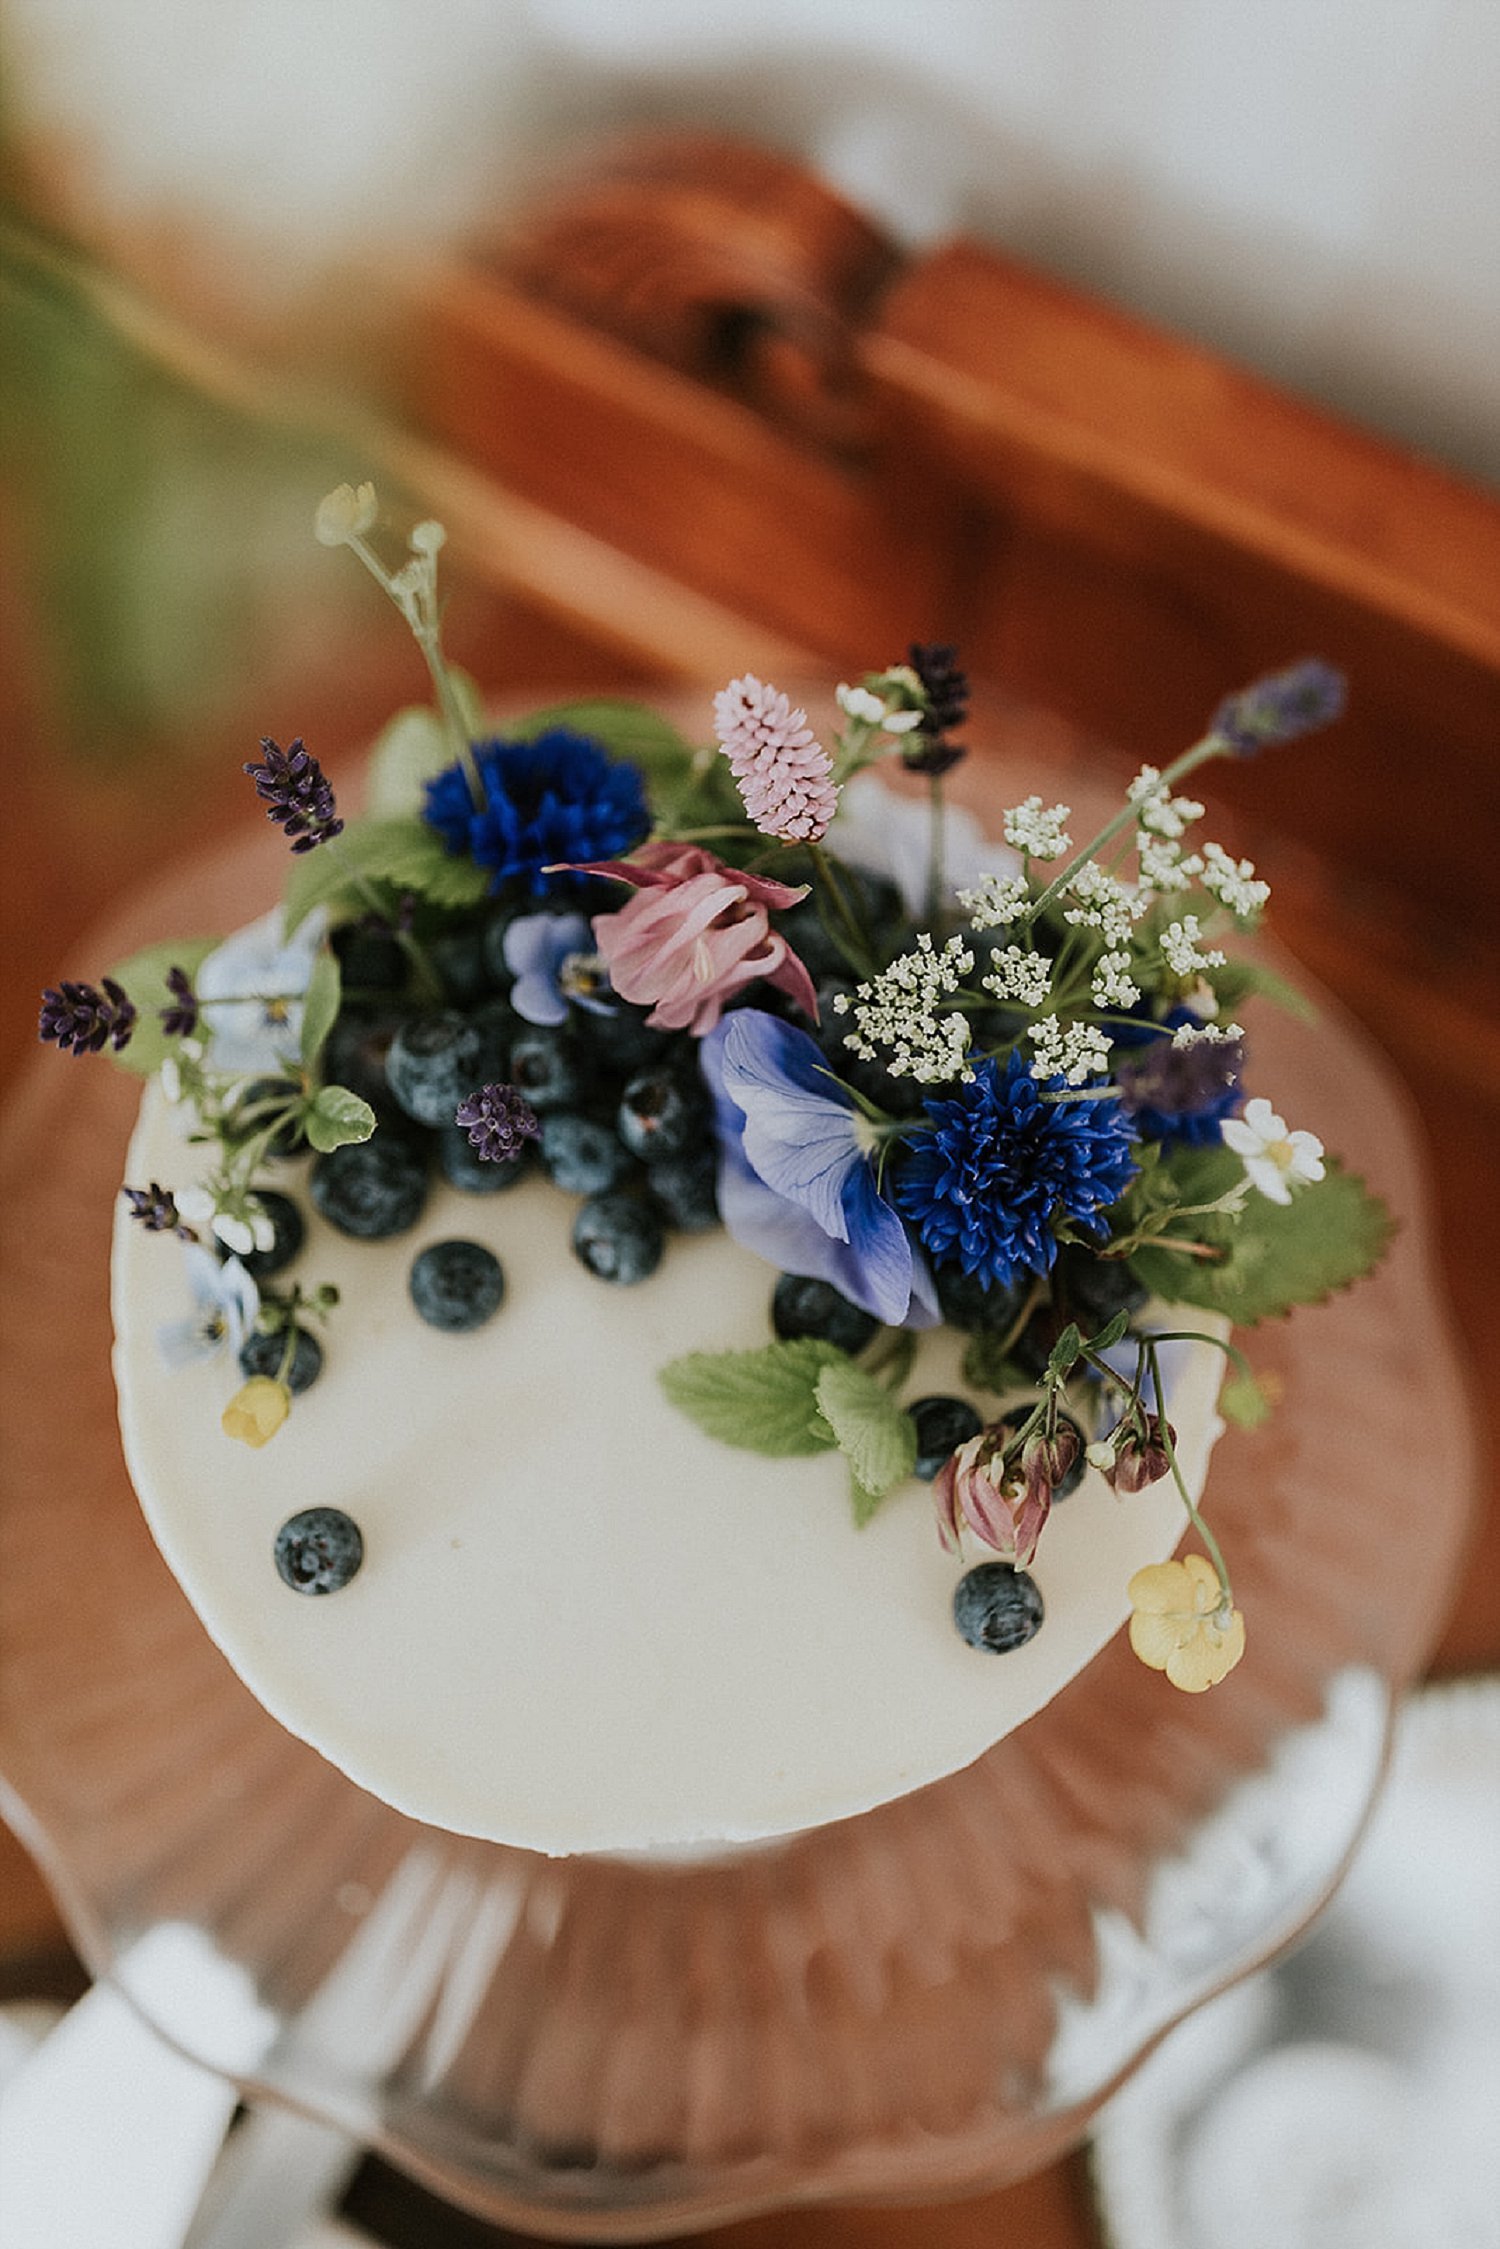 wedding cake with berries and flowers | full-service destination wedding | get married in Denmark | Aero Island | Danish Island Weddings | Denmark wedding planners and venue